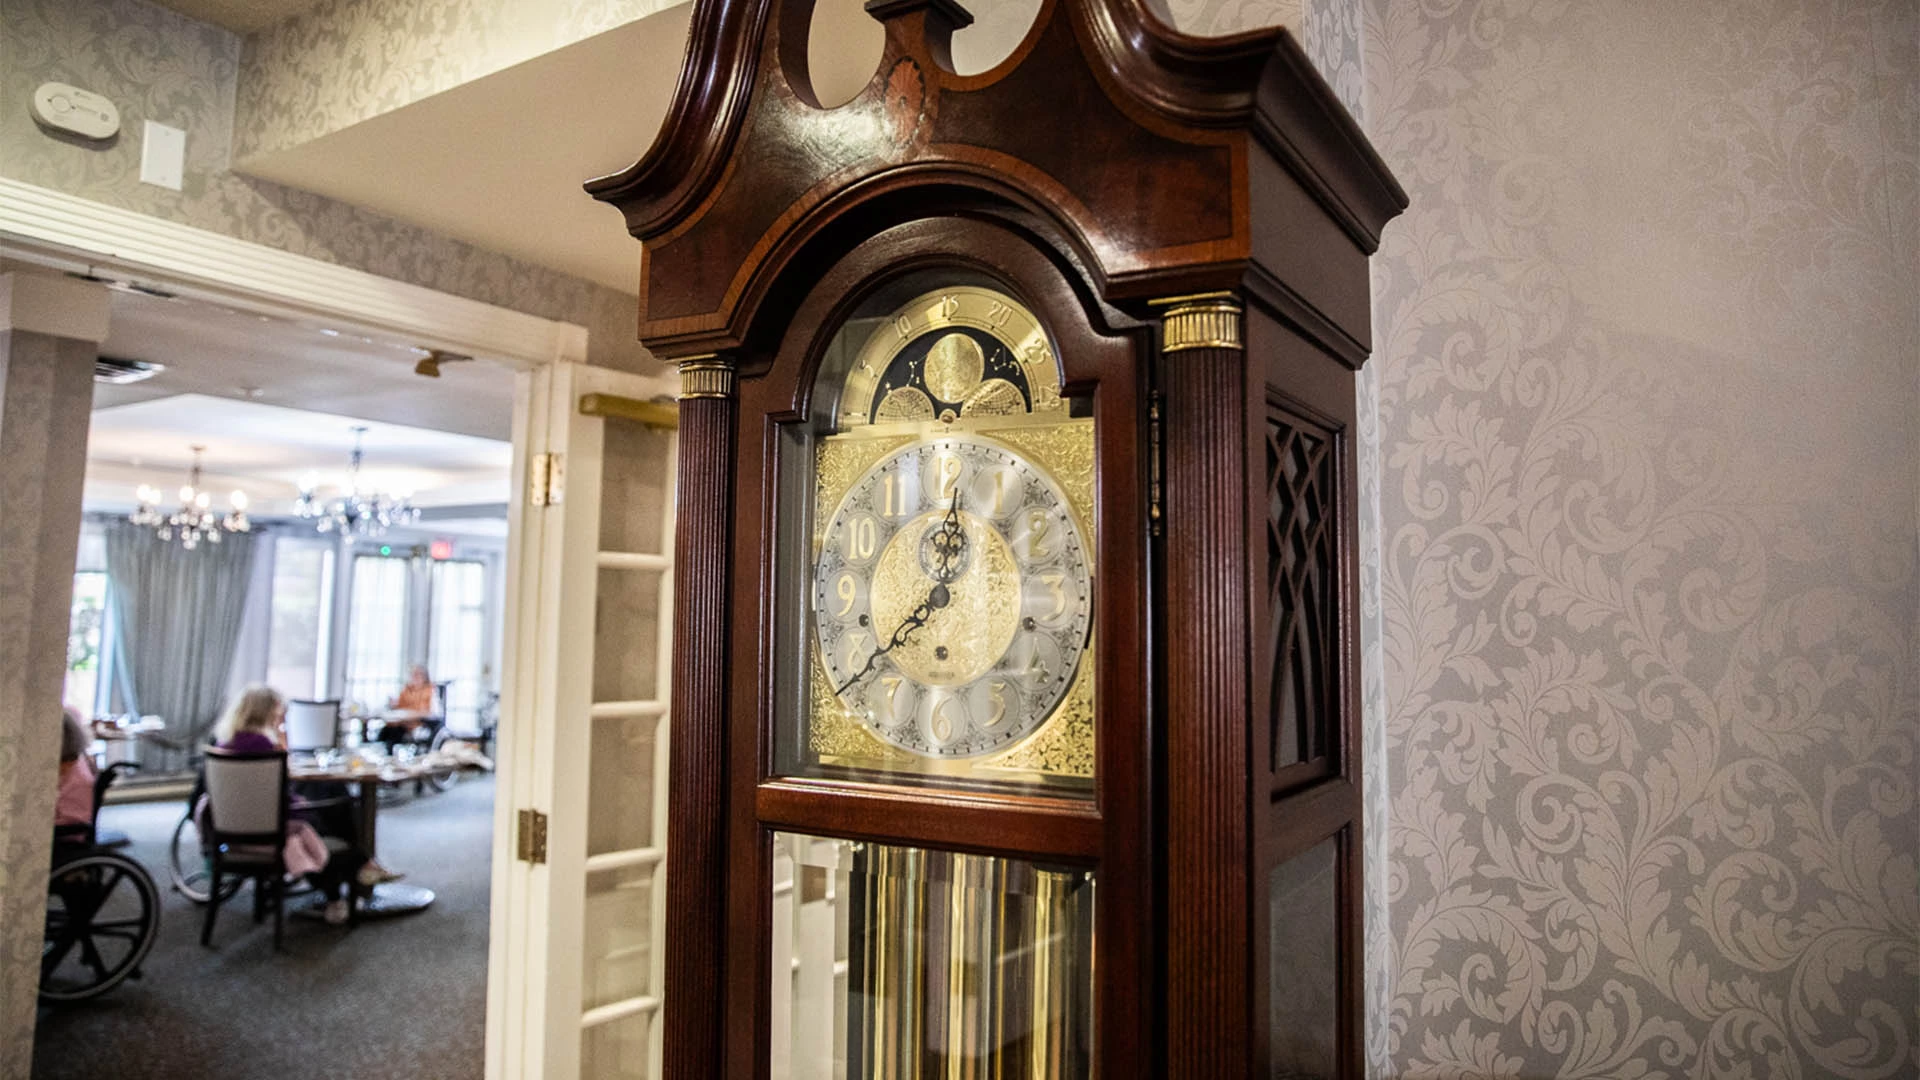 Brown and gold grandfather clock